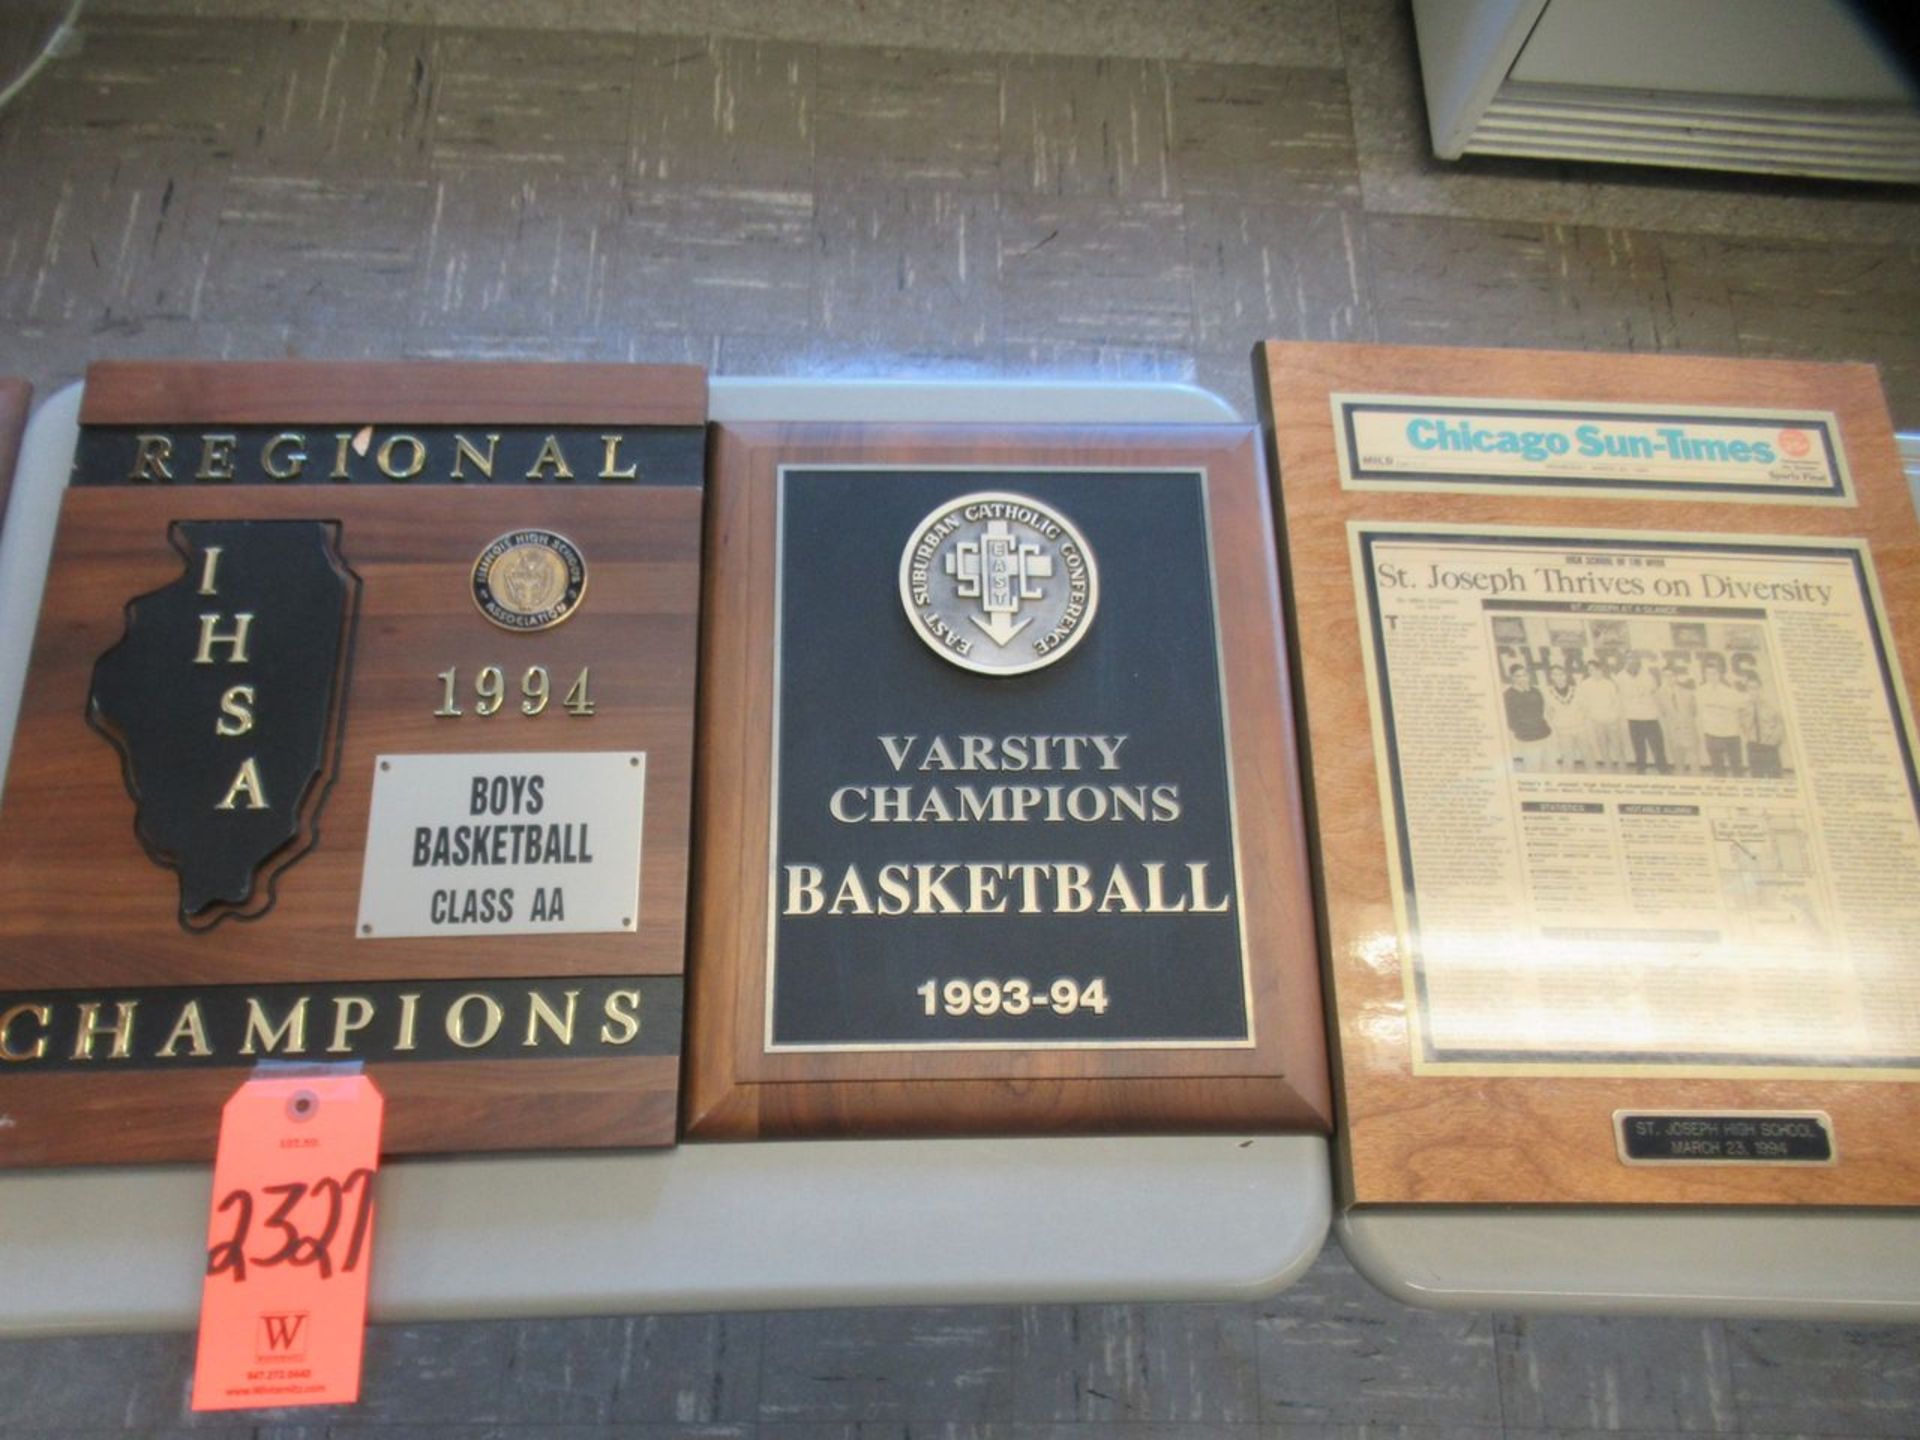 1994 IHSA Class AA State Regional Champions Plaque, 1993-1994 East Suburban Catholic Conference